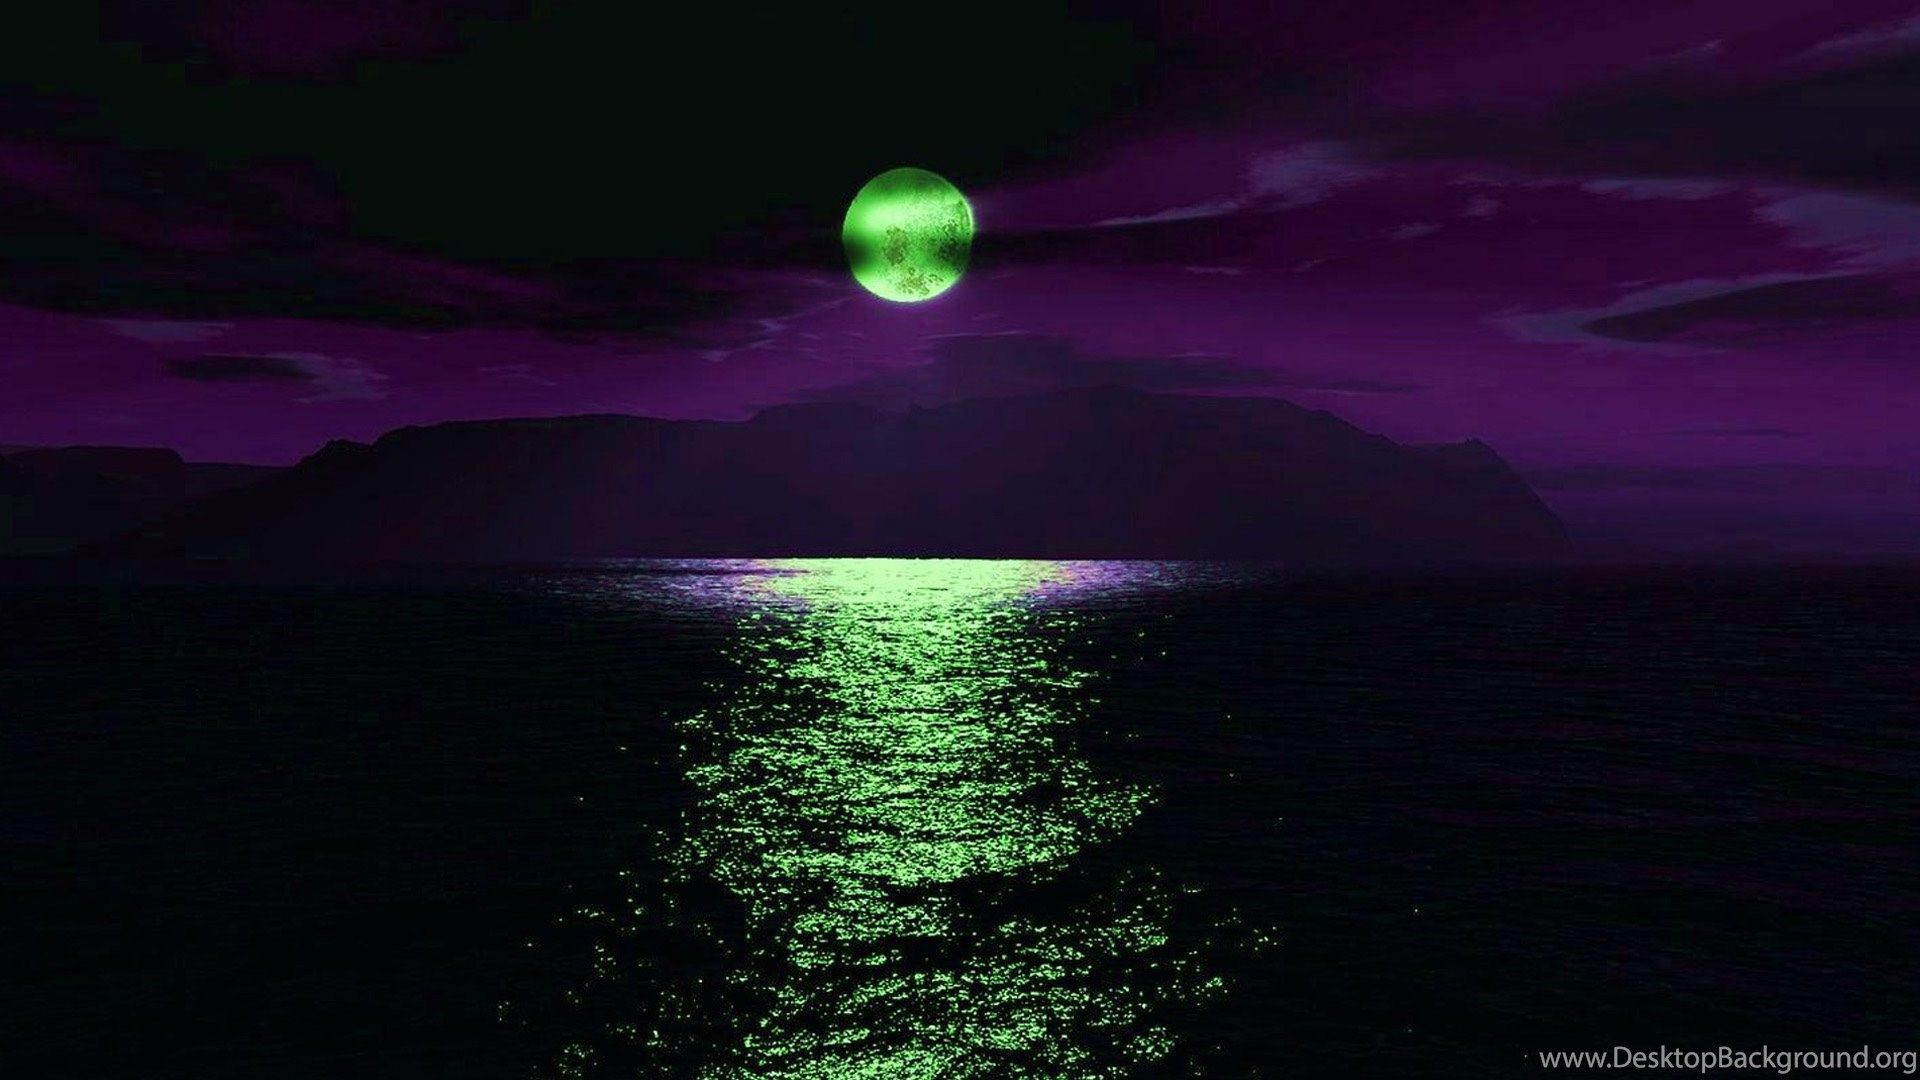 Green Moon Wallpapers 2258 Hd Wallpapers In Space Imagecicom